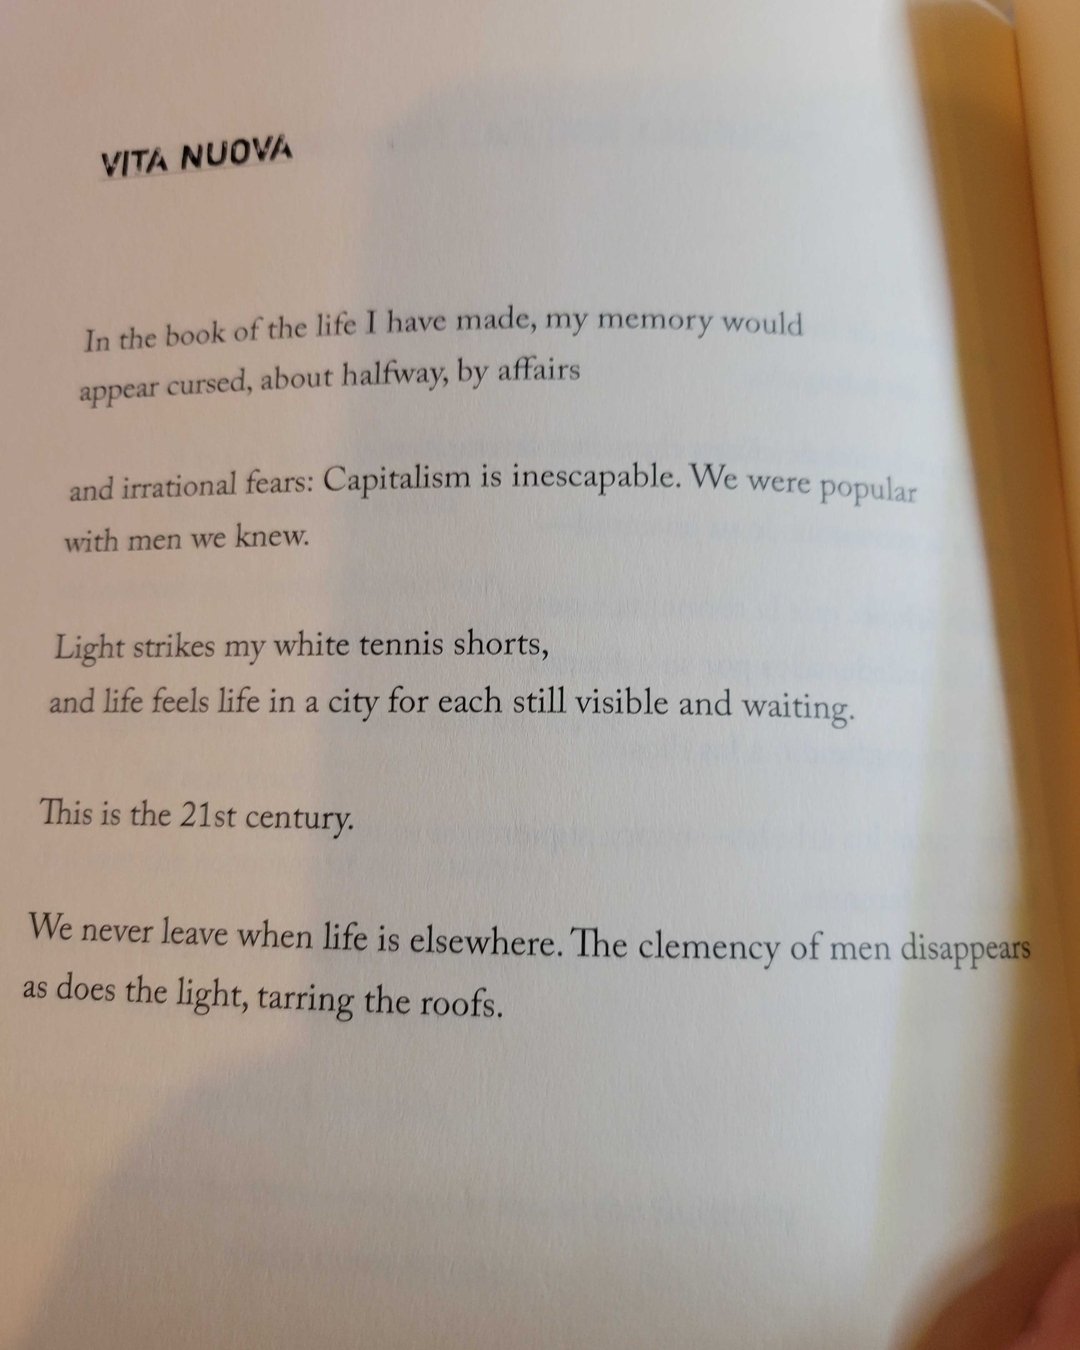 Last week, in our April Newsletter, we featured some of our teams' favorite poetry collections. Here is a poem from Andy's pick: Life Assignment by PB friend @ridarditomaldonado

If you haven't signed up for our newsletter yet, you can sign up via th